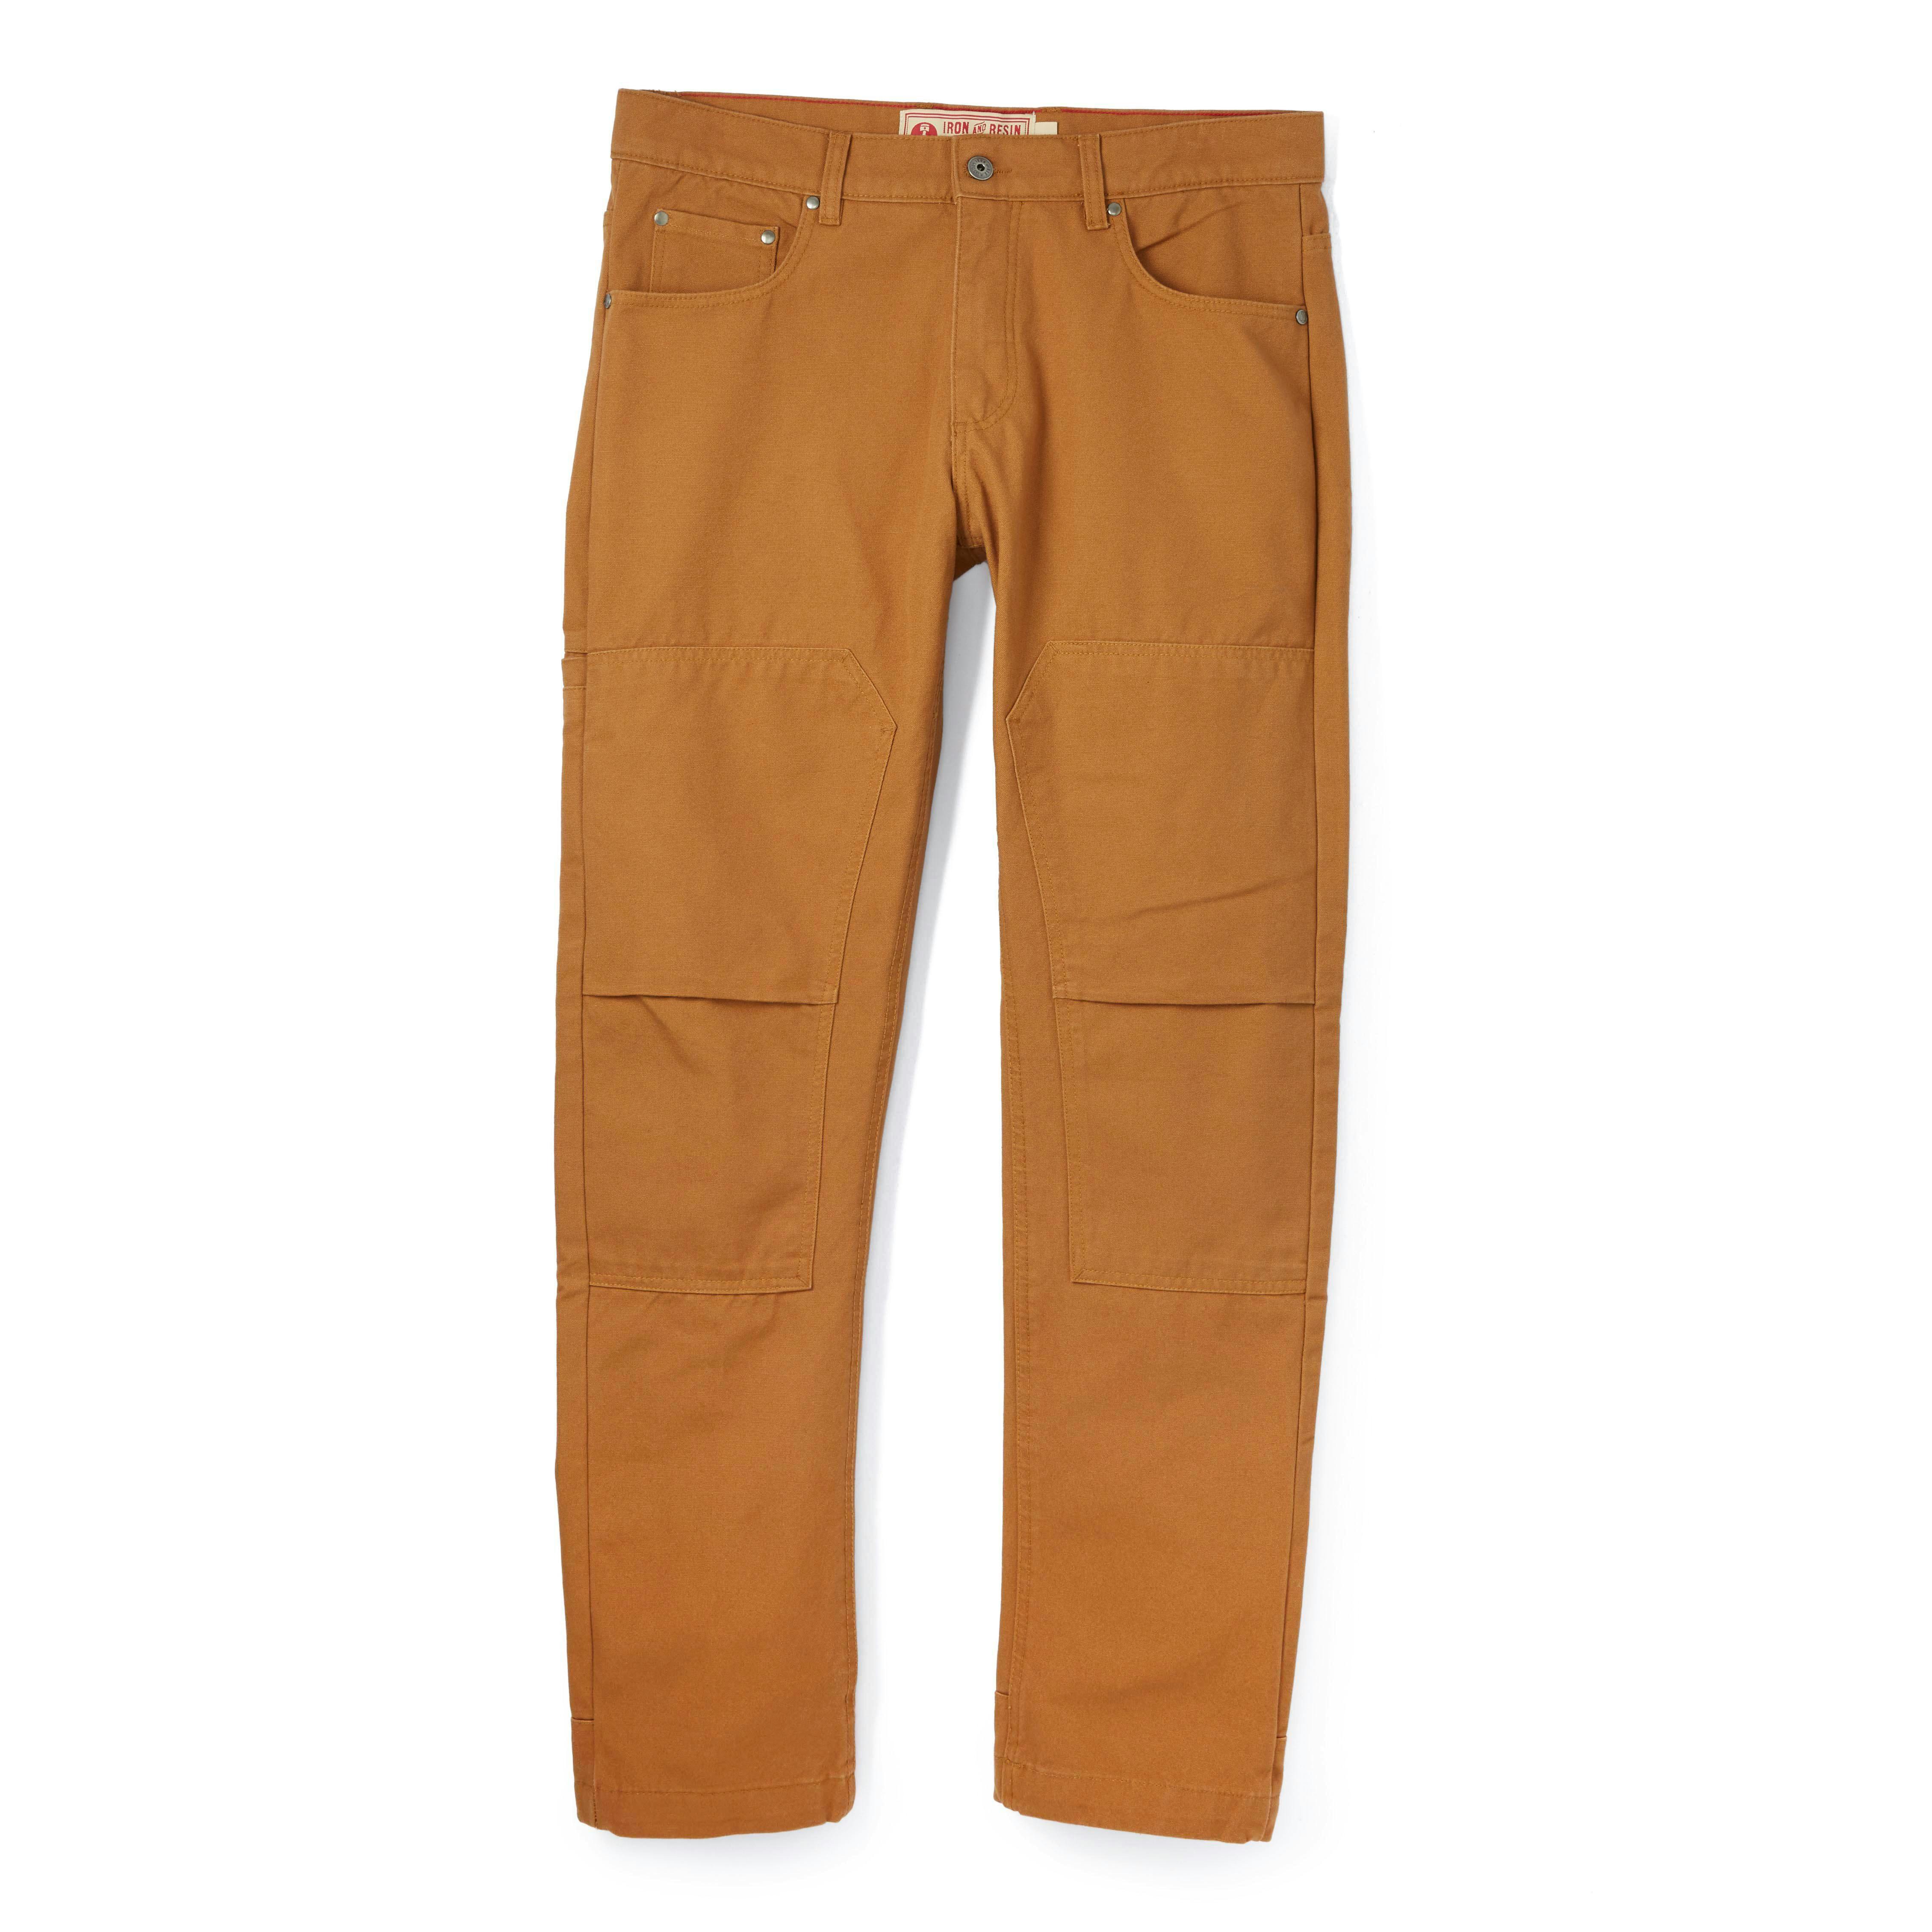 Iron and Resin Union Duck Canvas Work Pant - Cognac